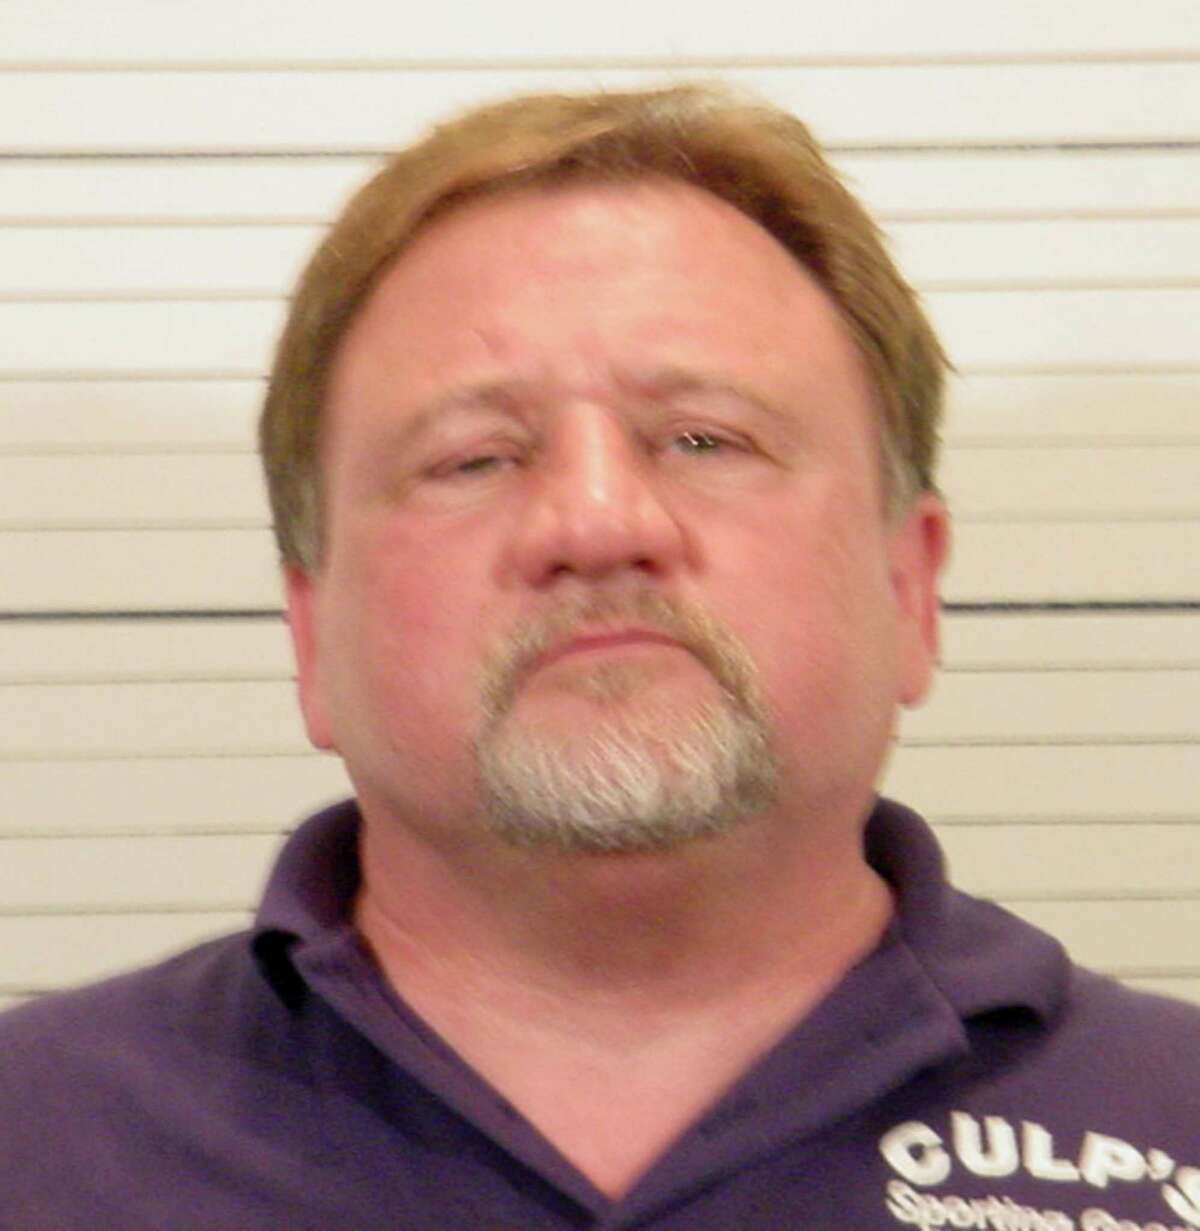 This 2006 photo provided by the St. Clair County, Ill., Sheriff's Deparment shows James T. Hodgkinson. Officials said Hodgkinson has been identified as the man who opened fire on Republican lawmakers at a congressional baseball practice Wednesday June 14, 2017 in Alexandria, Va. (St. Clair County Illinois Sheriff's Deparment via AP)